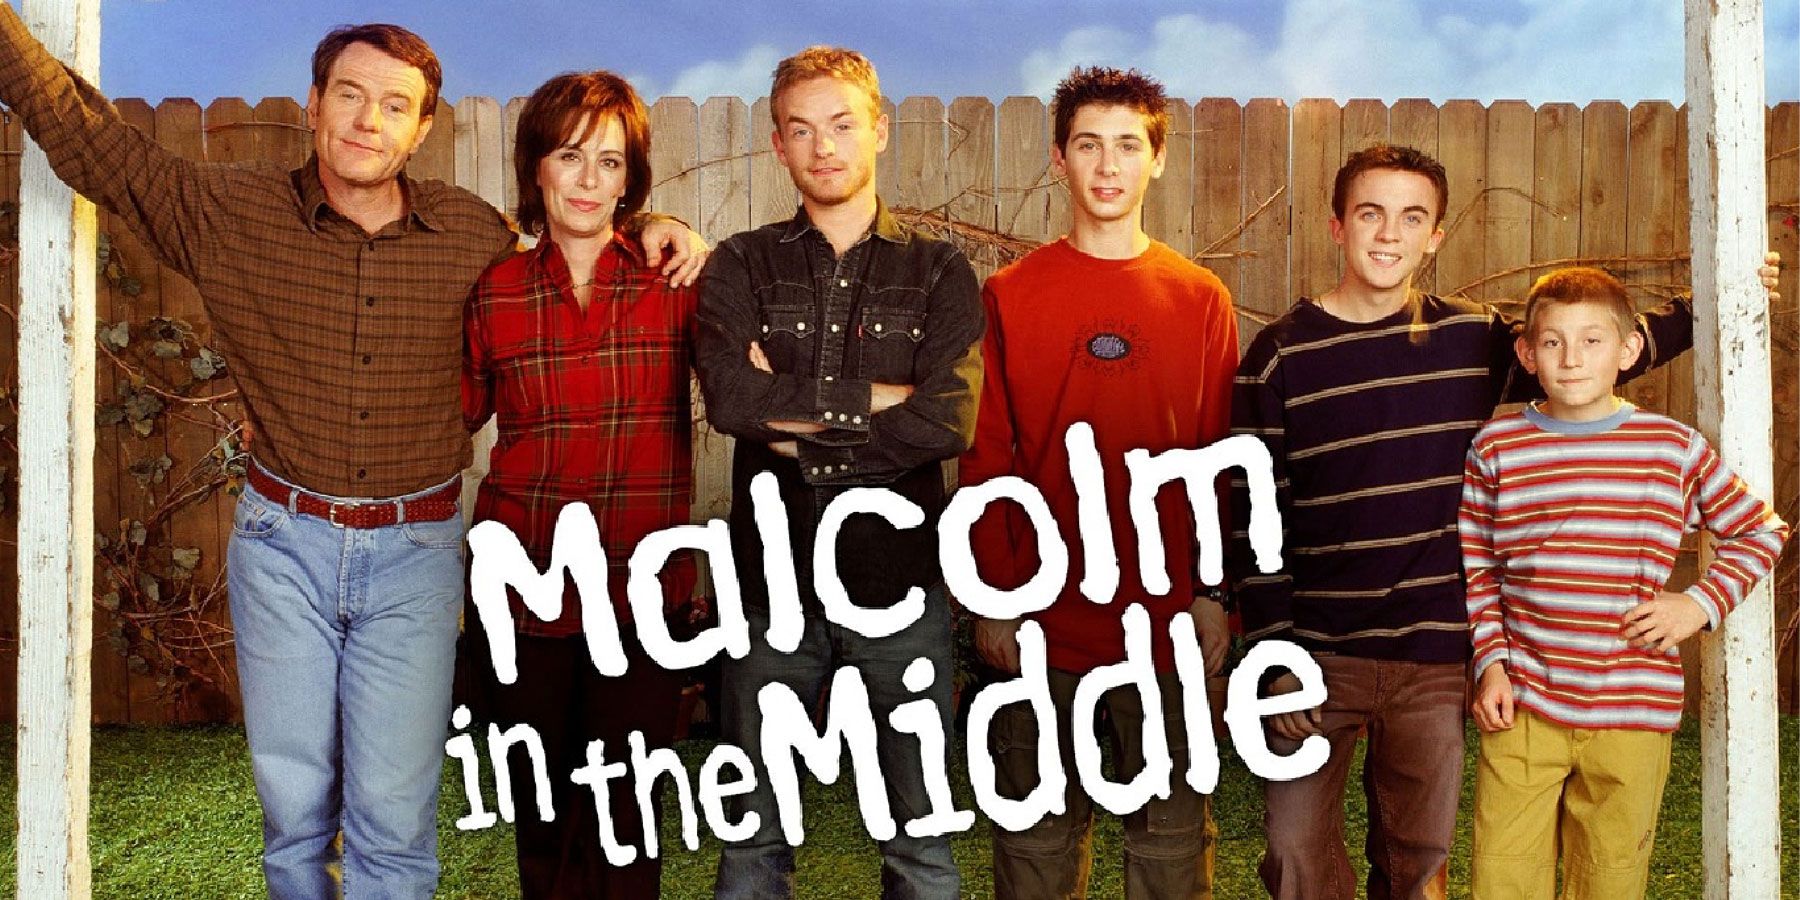 Promotional poster for Malcolm in the Middle.